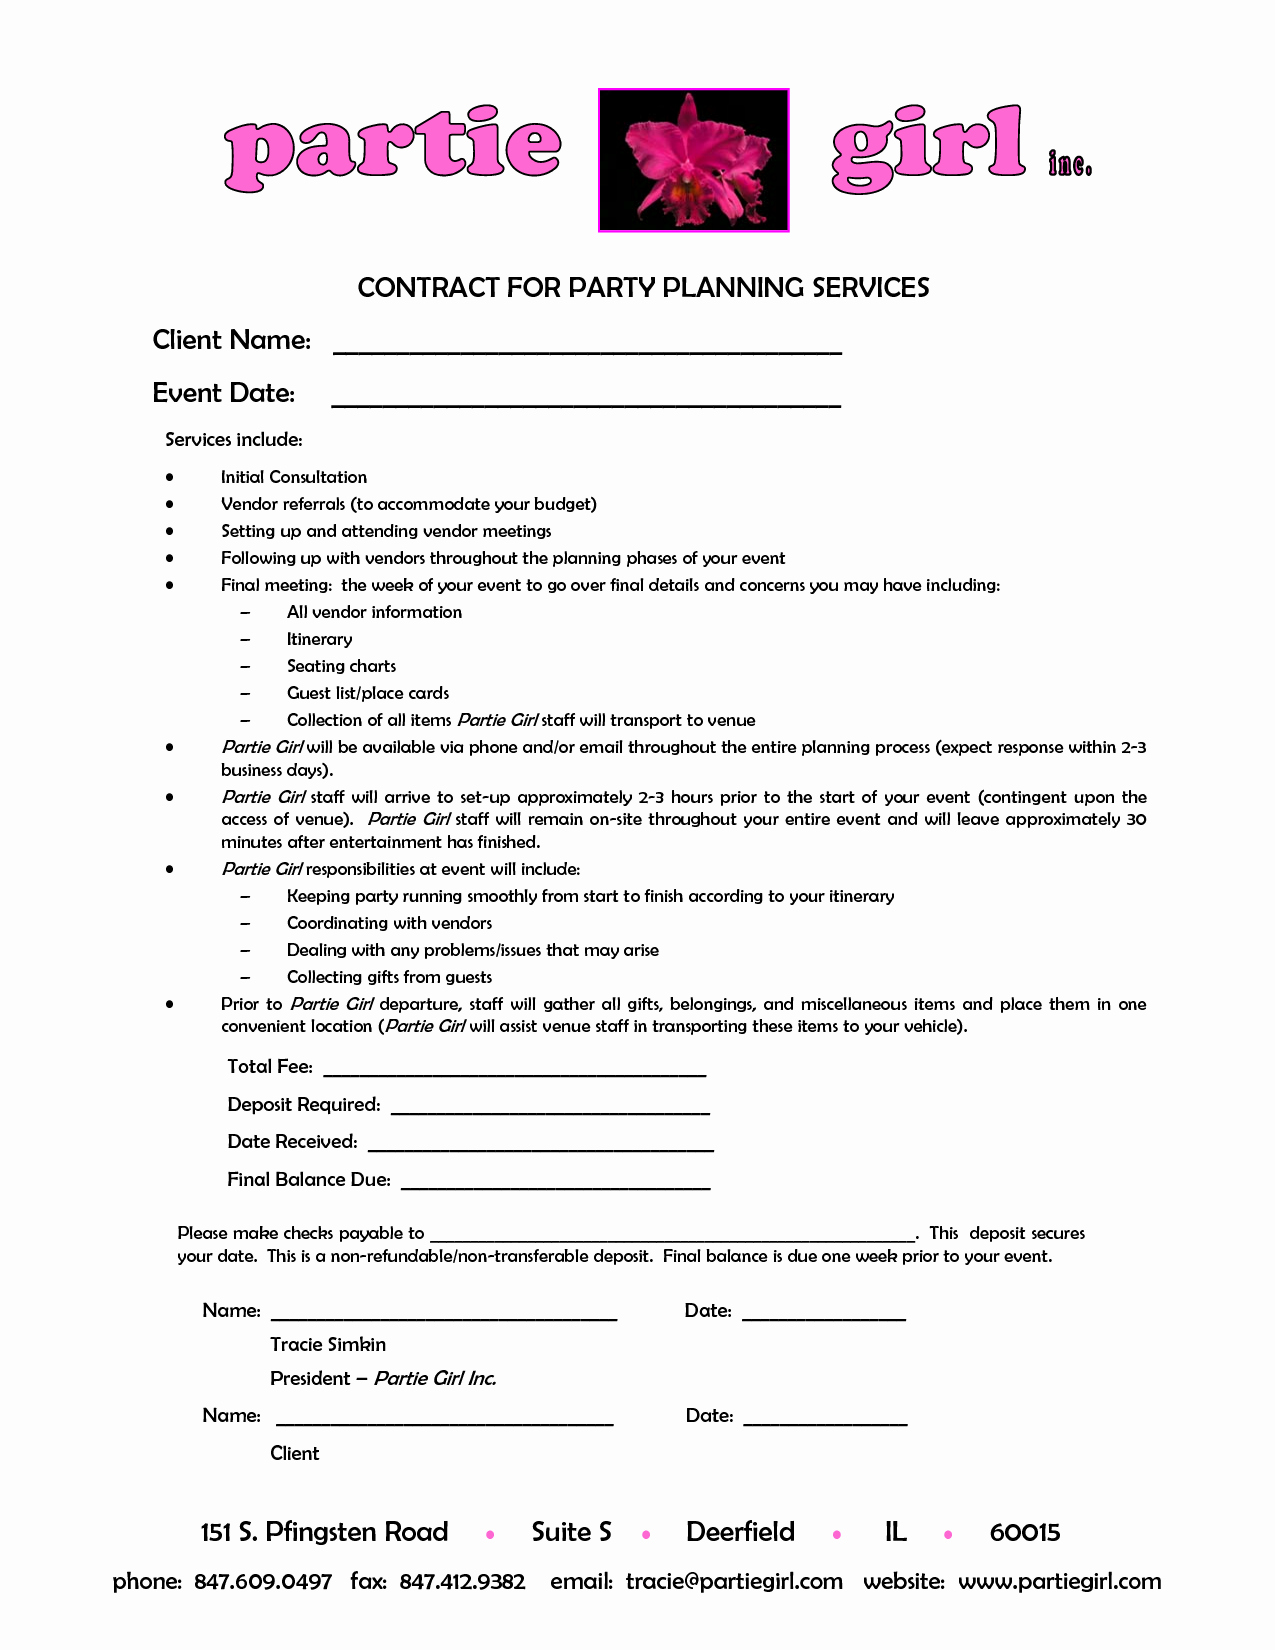 Vendor Contract for event Lovely Party Planner Contract Template Google Search